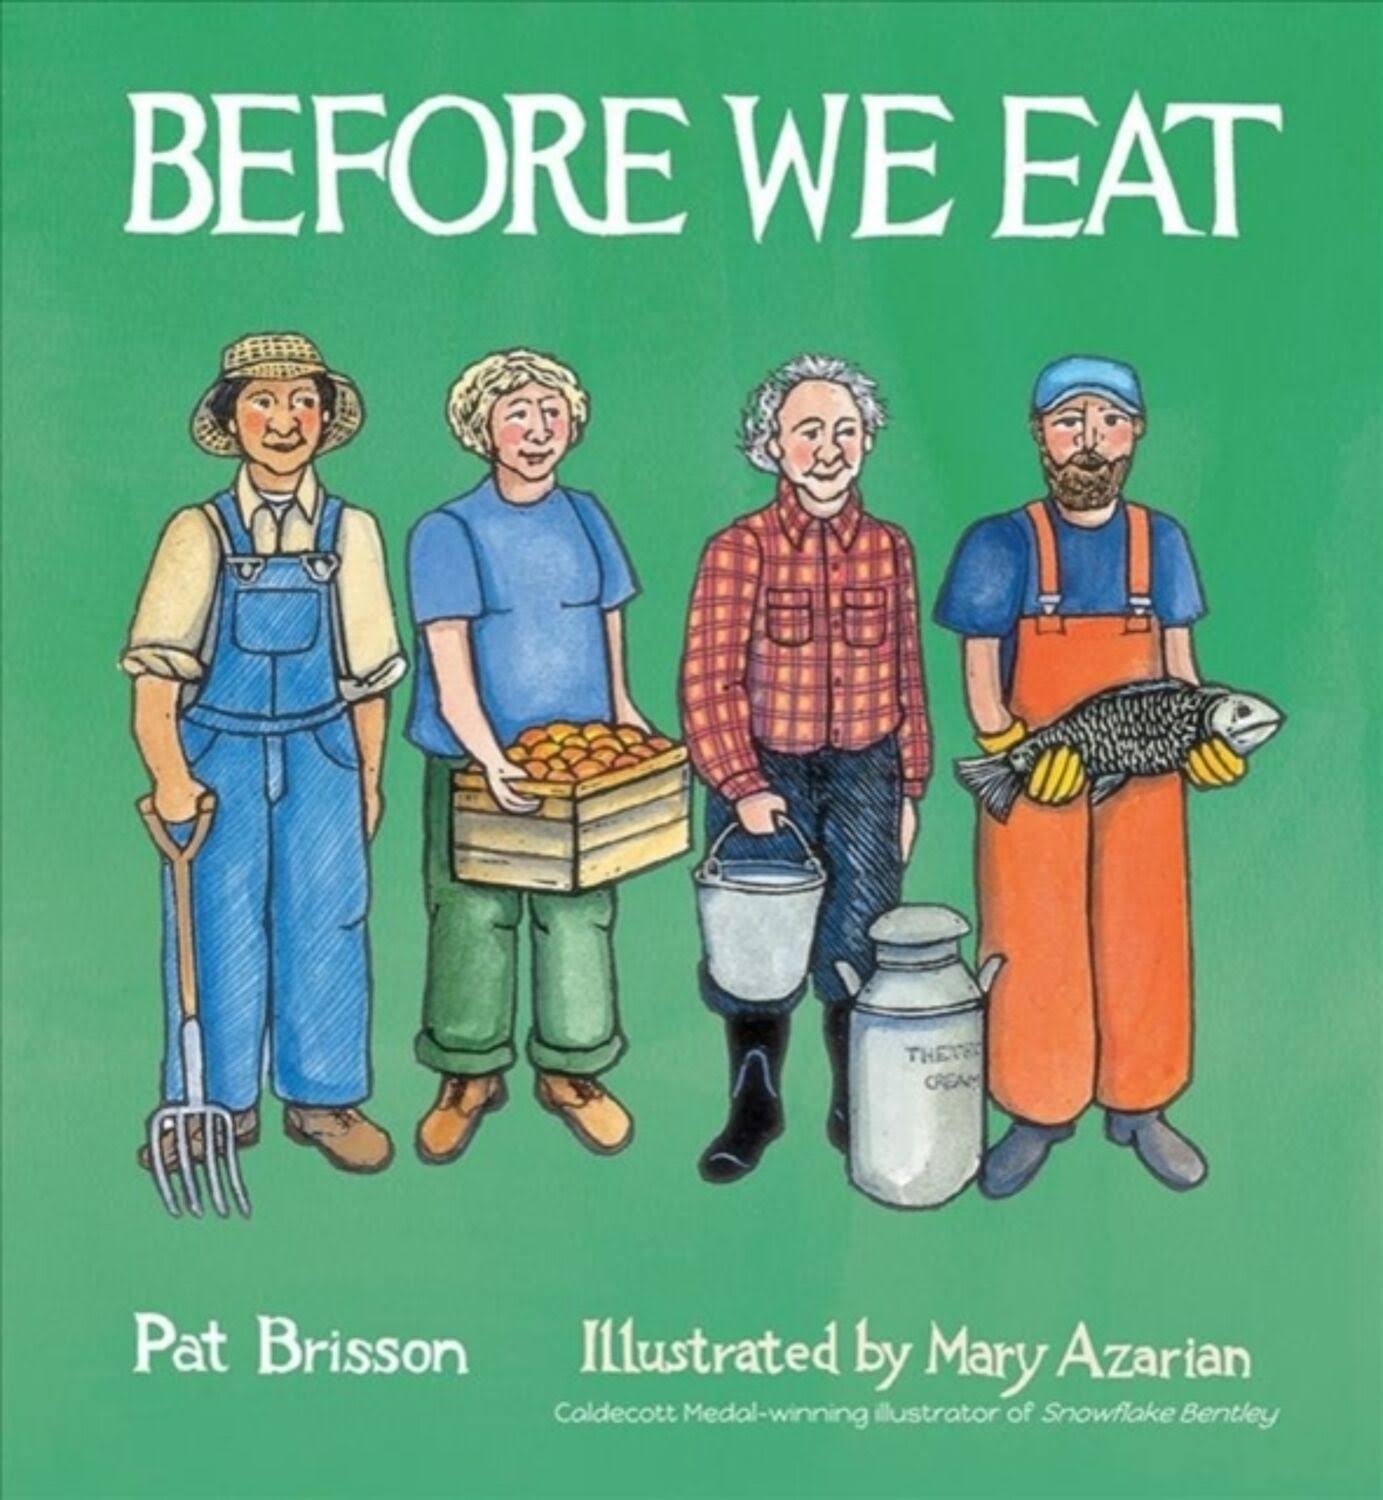 Before We Eat [Book]